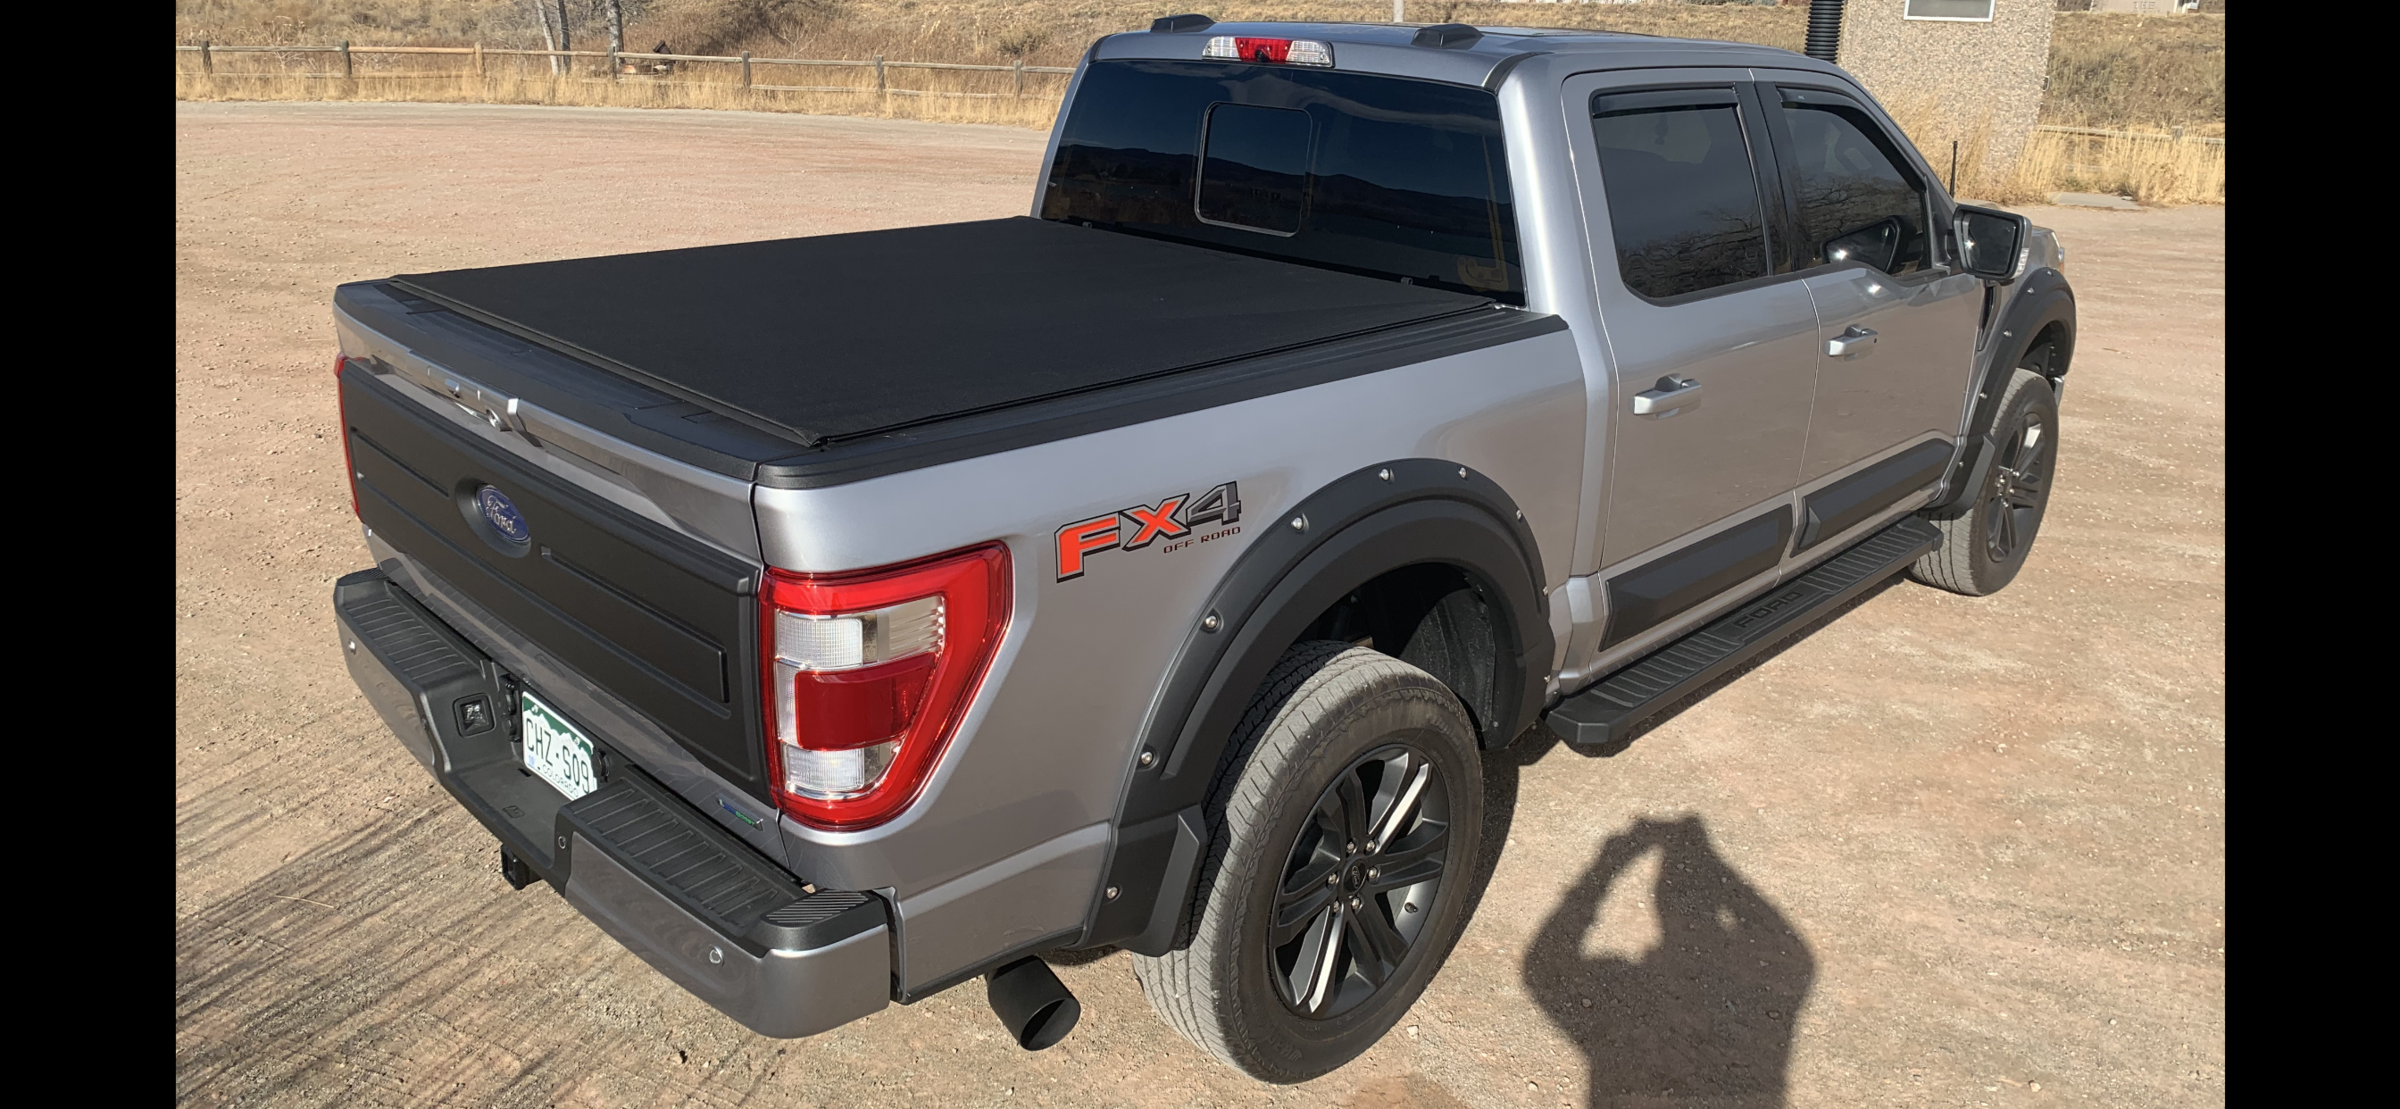 Ford F-150 Tonneau Covers - Recommendations and Reviews 8BD16086-F4C7-4686-A150-D2185306069B